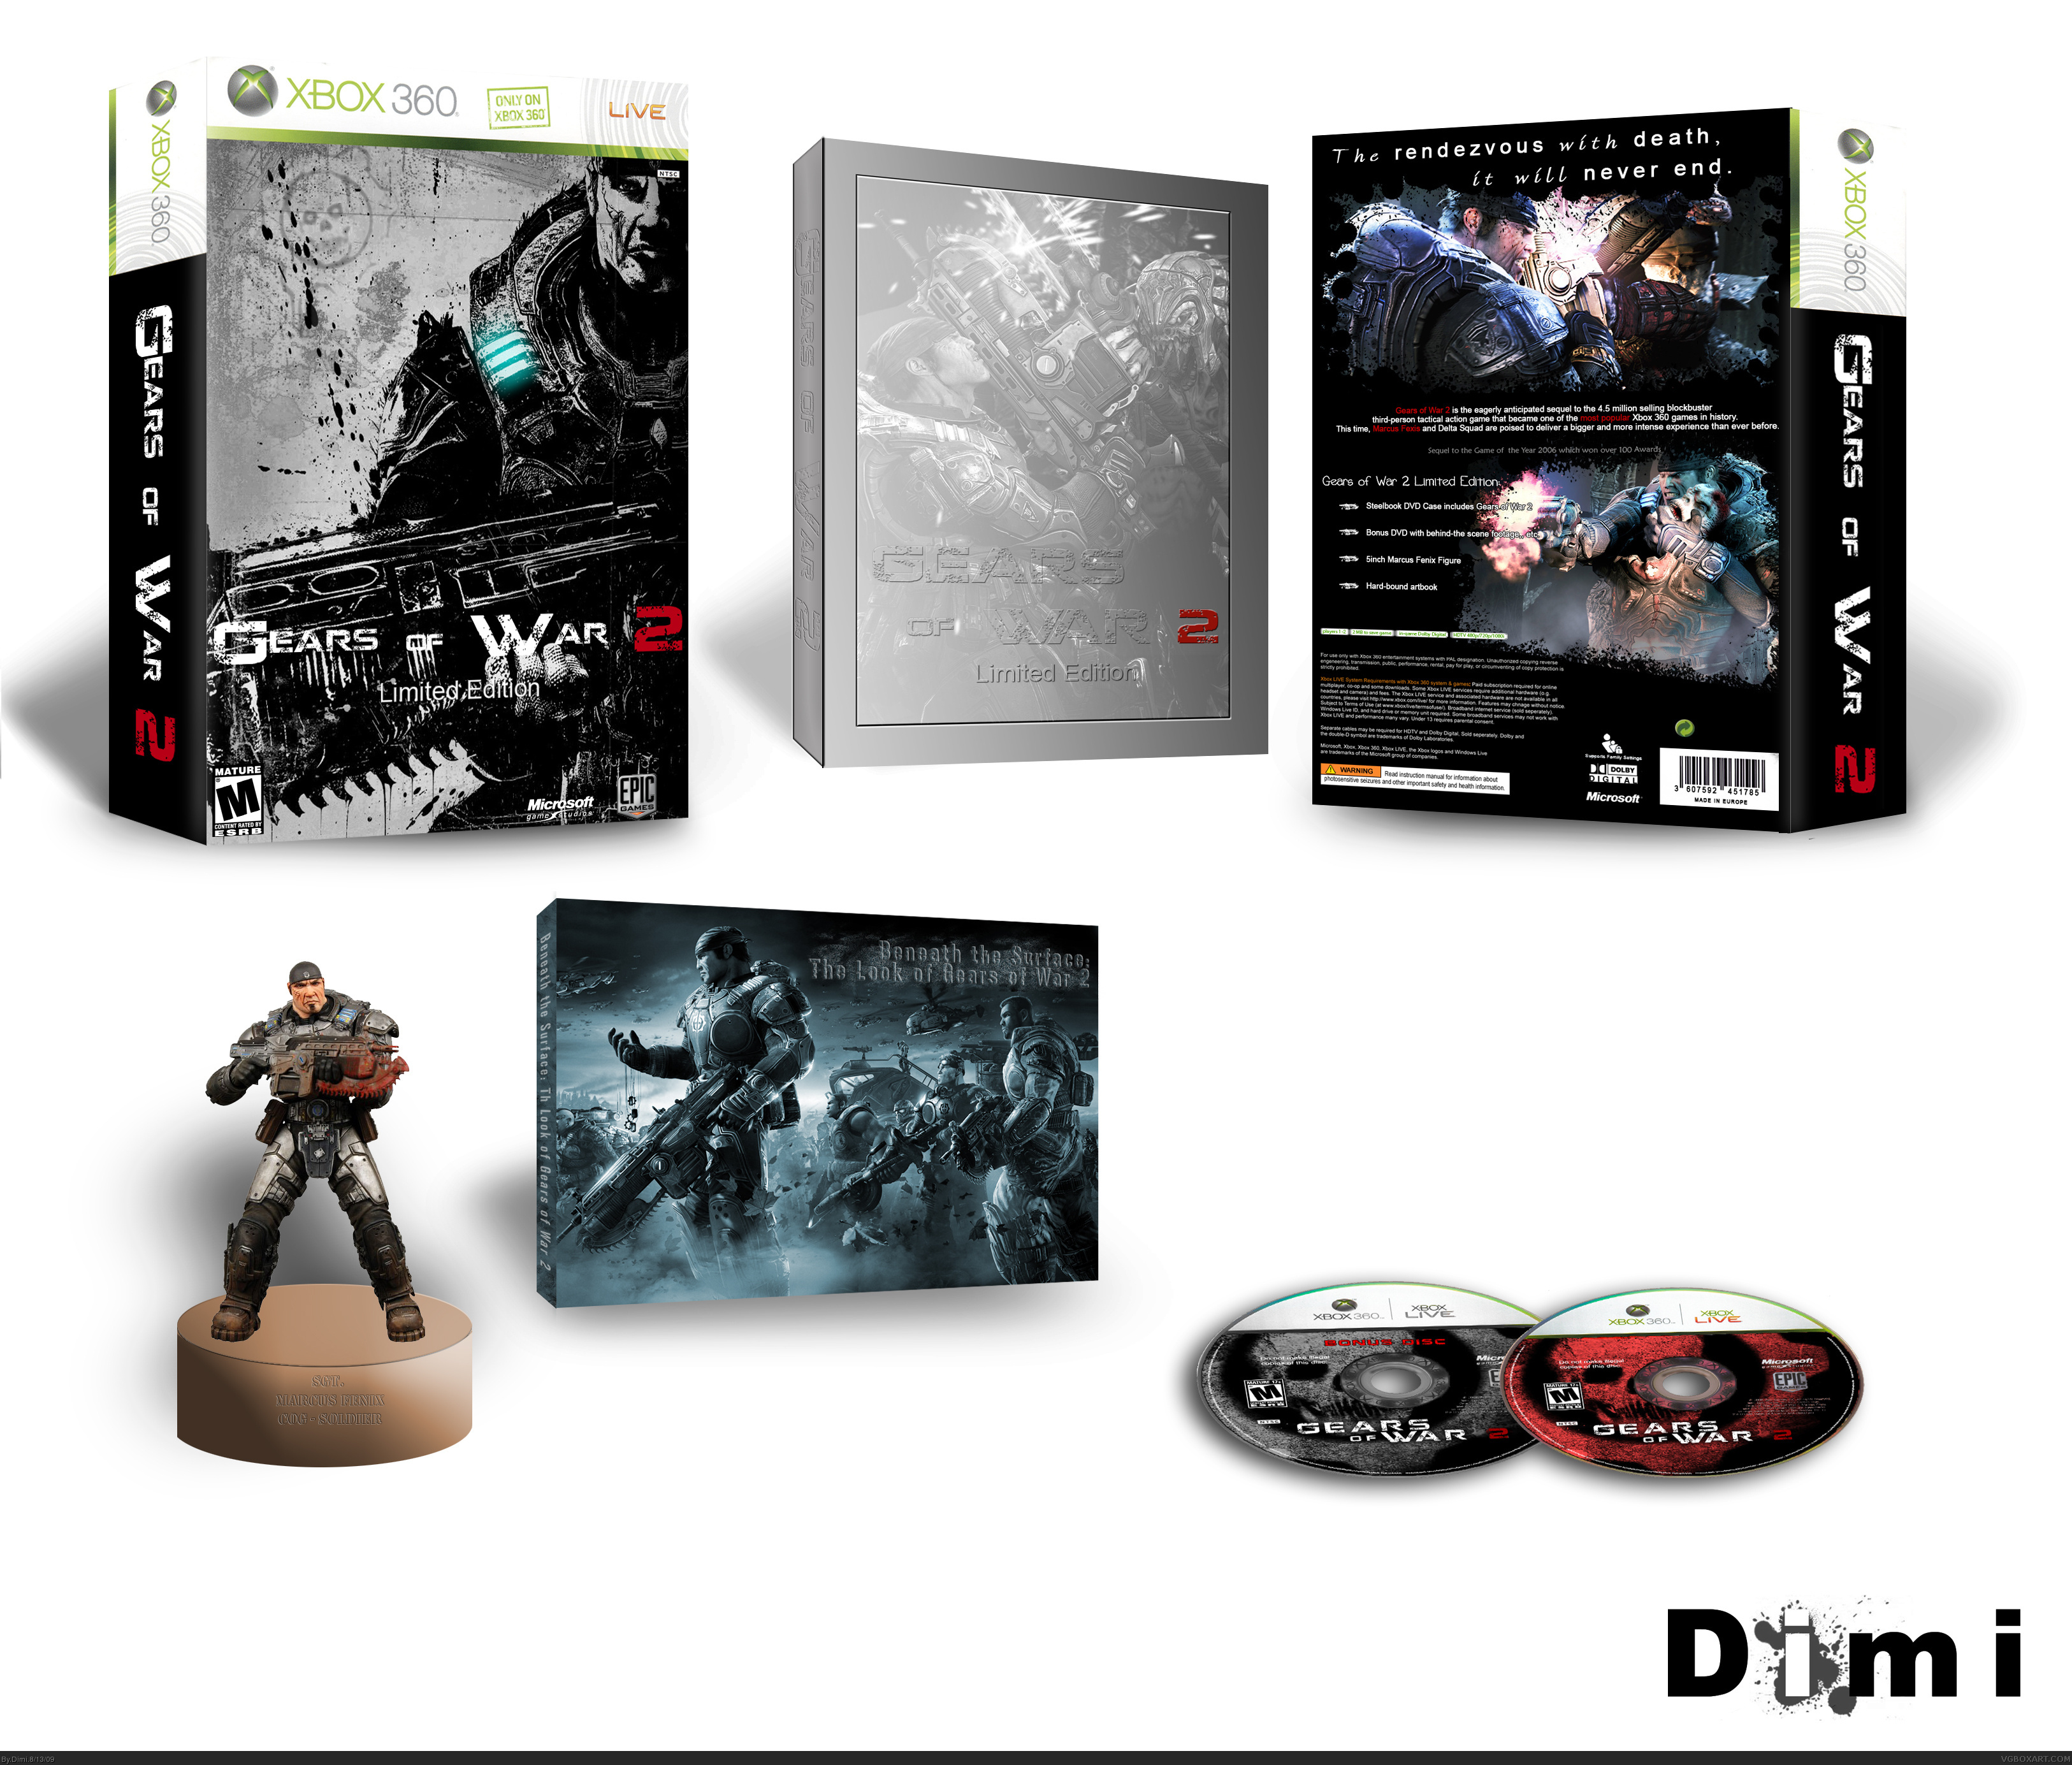 Gears of War 2 Limited Edition box cover